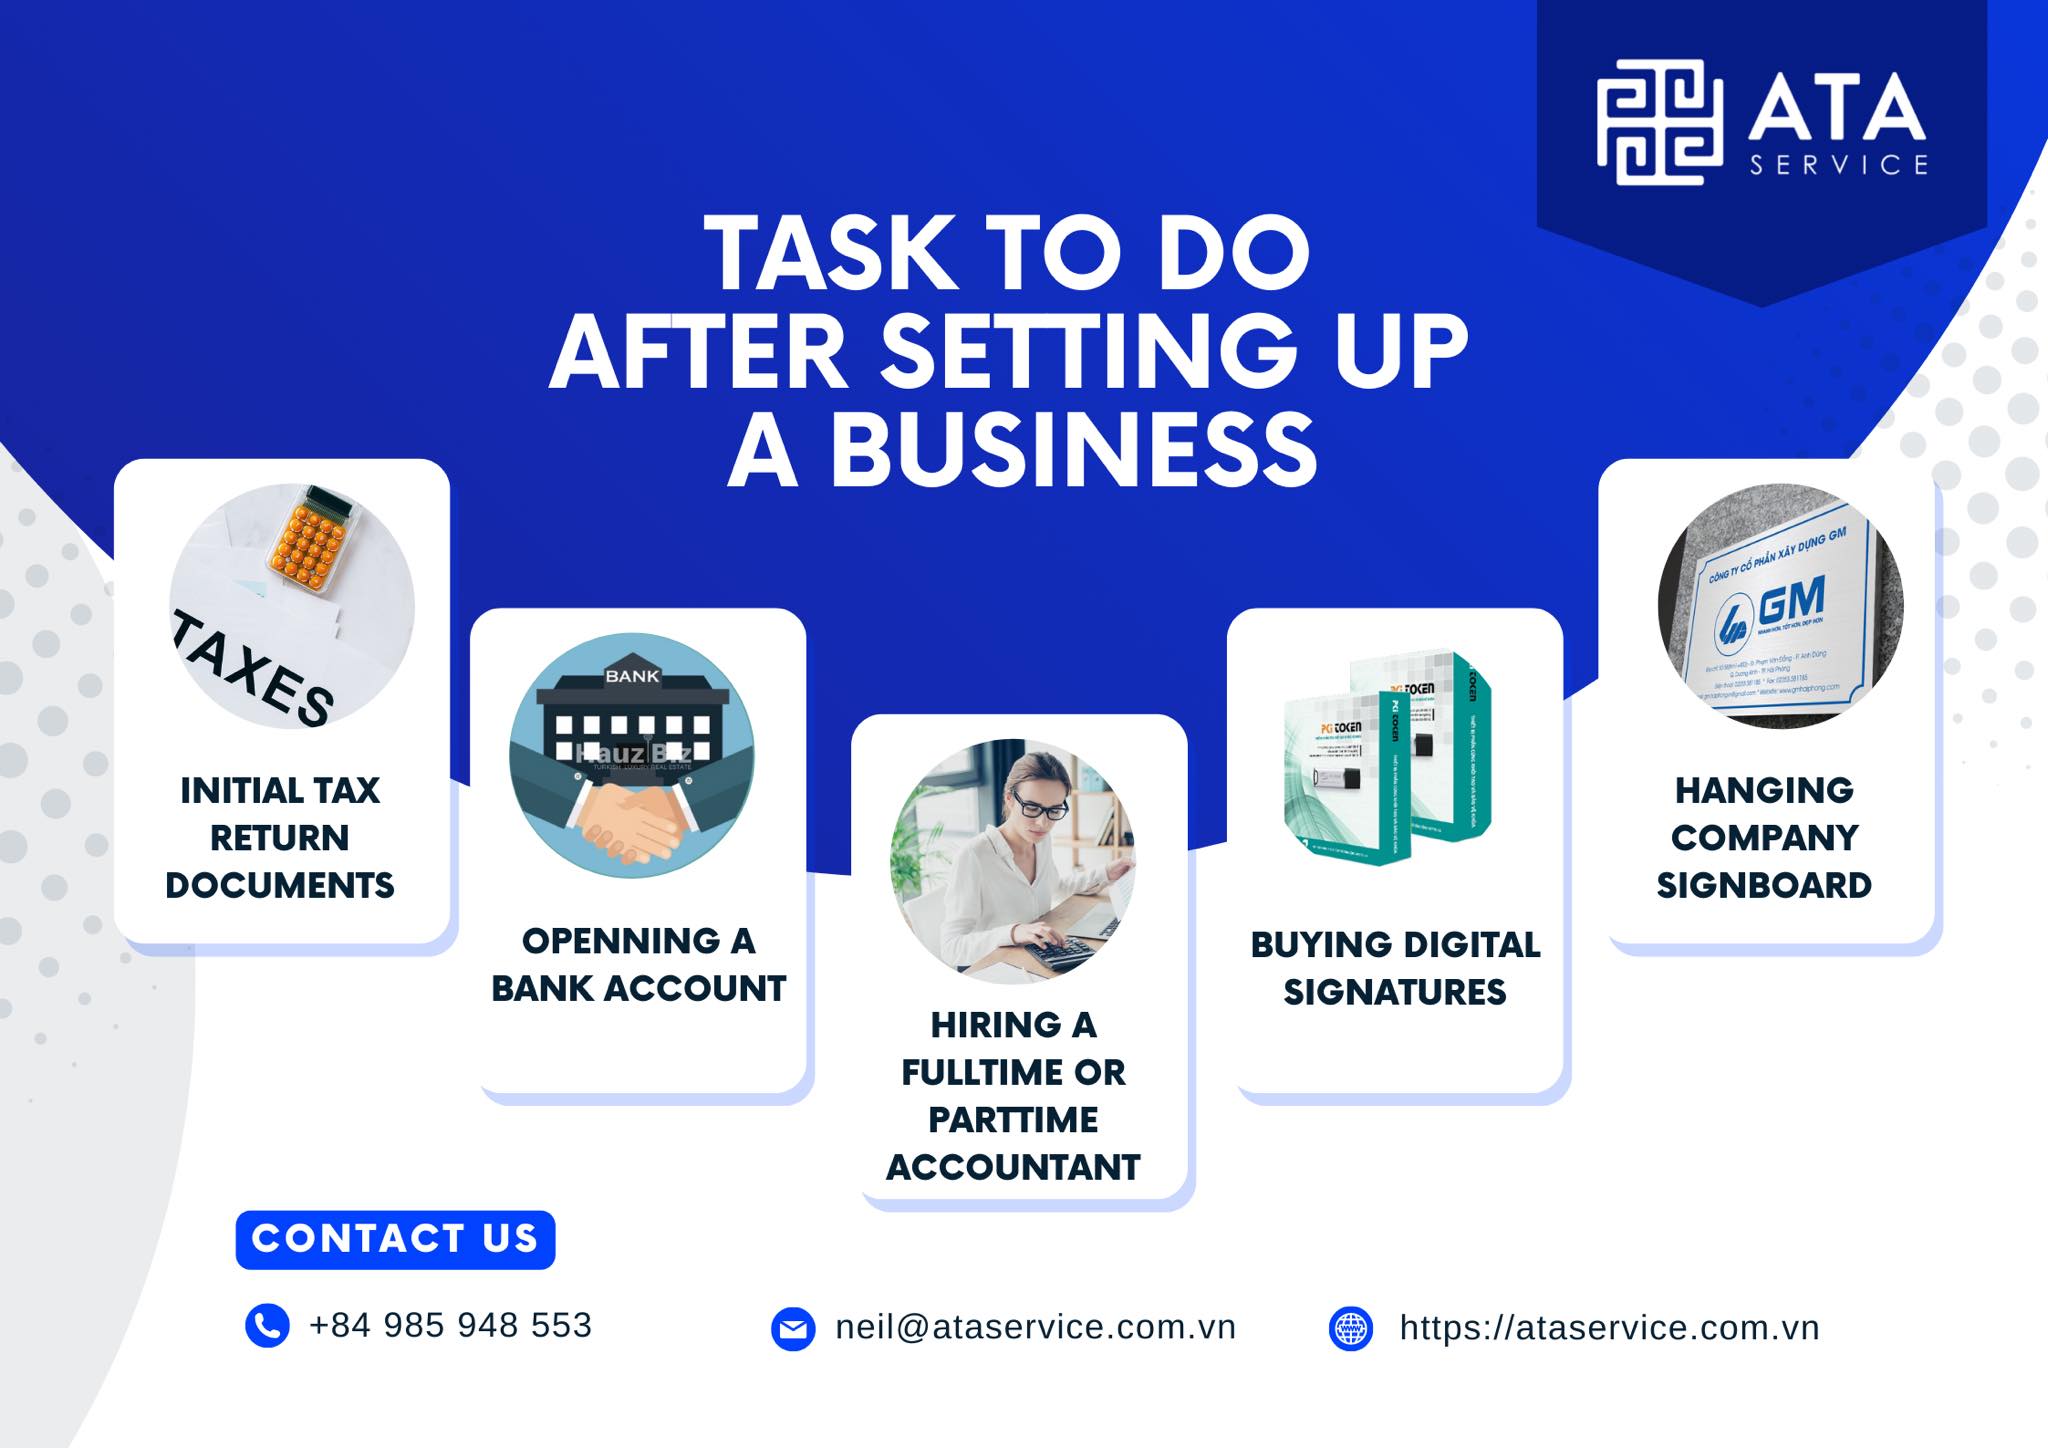 TASK TO DO AFTER SETTING UP A BUSINESS